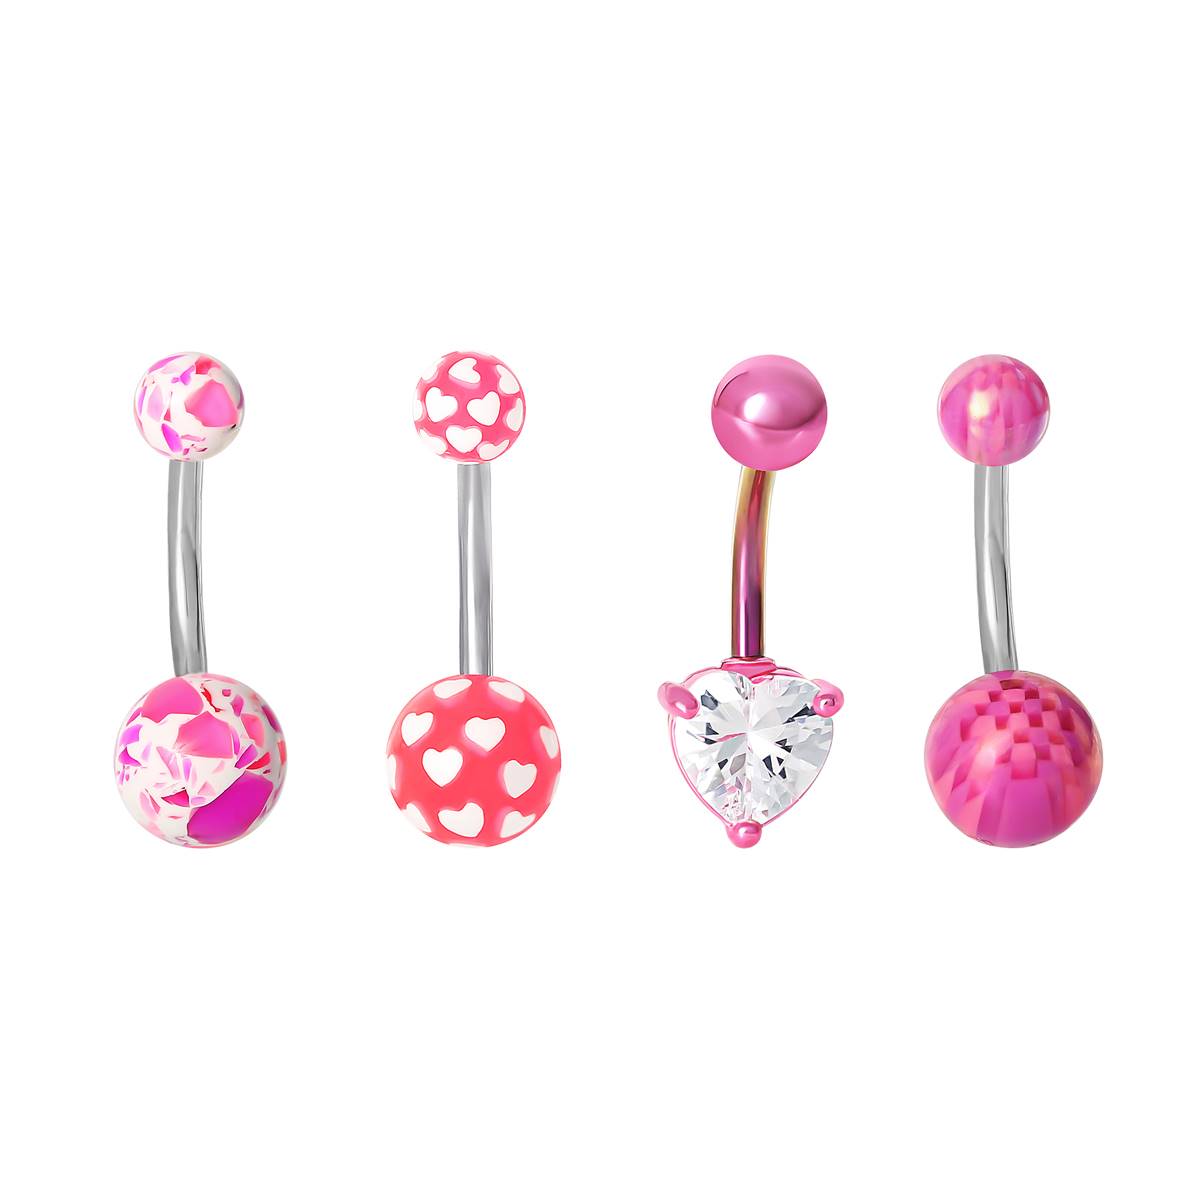 14 Gauge Stainless Steel 4pc. Belly Ring Set